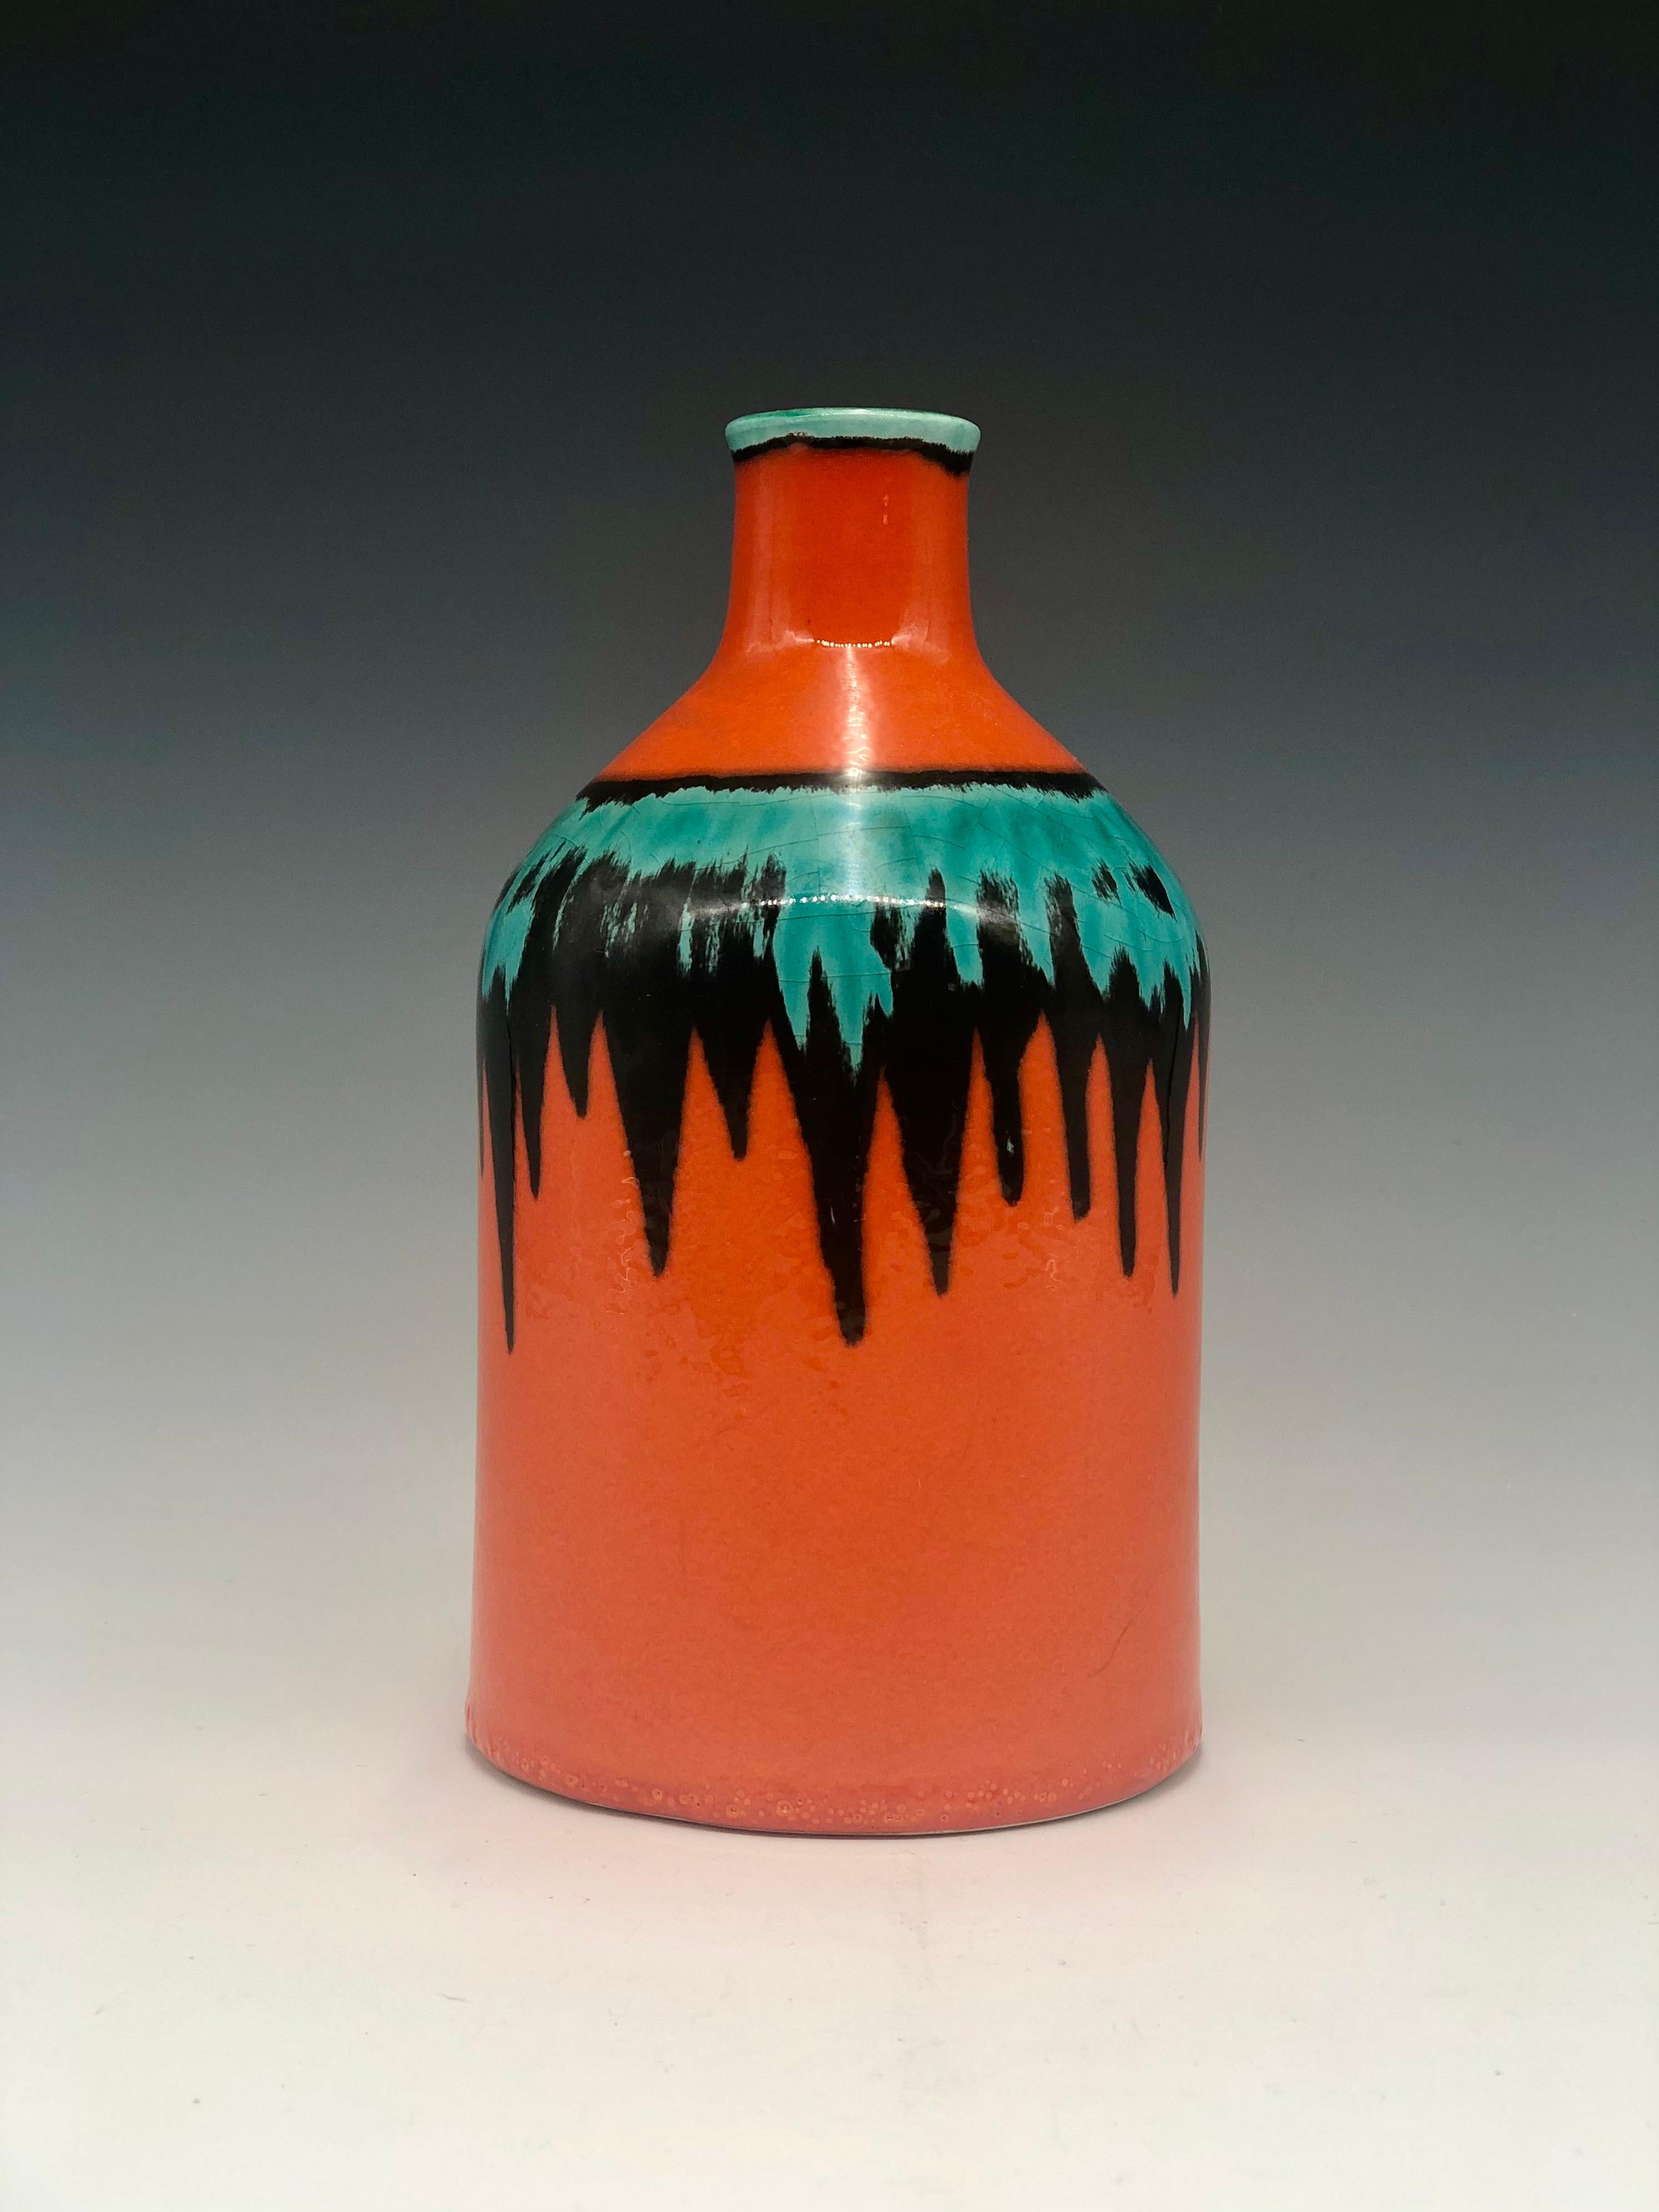 Vintage Orange Black and Aqua Green Ceramic Vase by Cortendorf, West Germany In Good Condition For Sale In East Quogue, NY